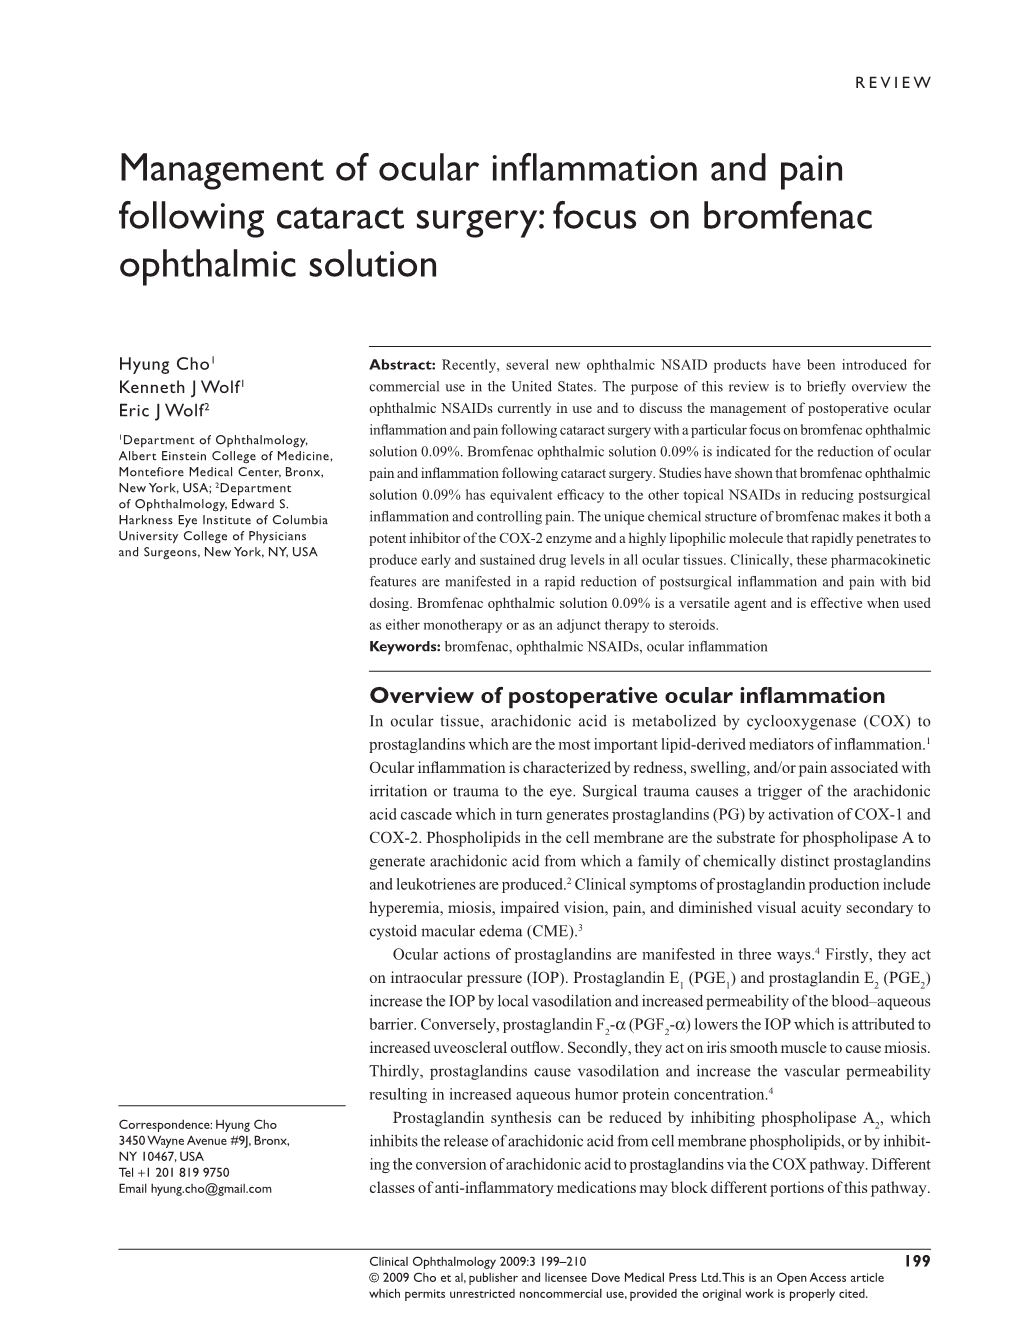 Management of Ocular Inflammation and Pain Following Cataract Surgery